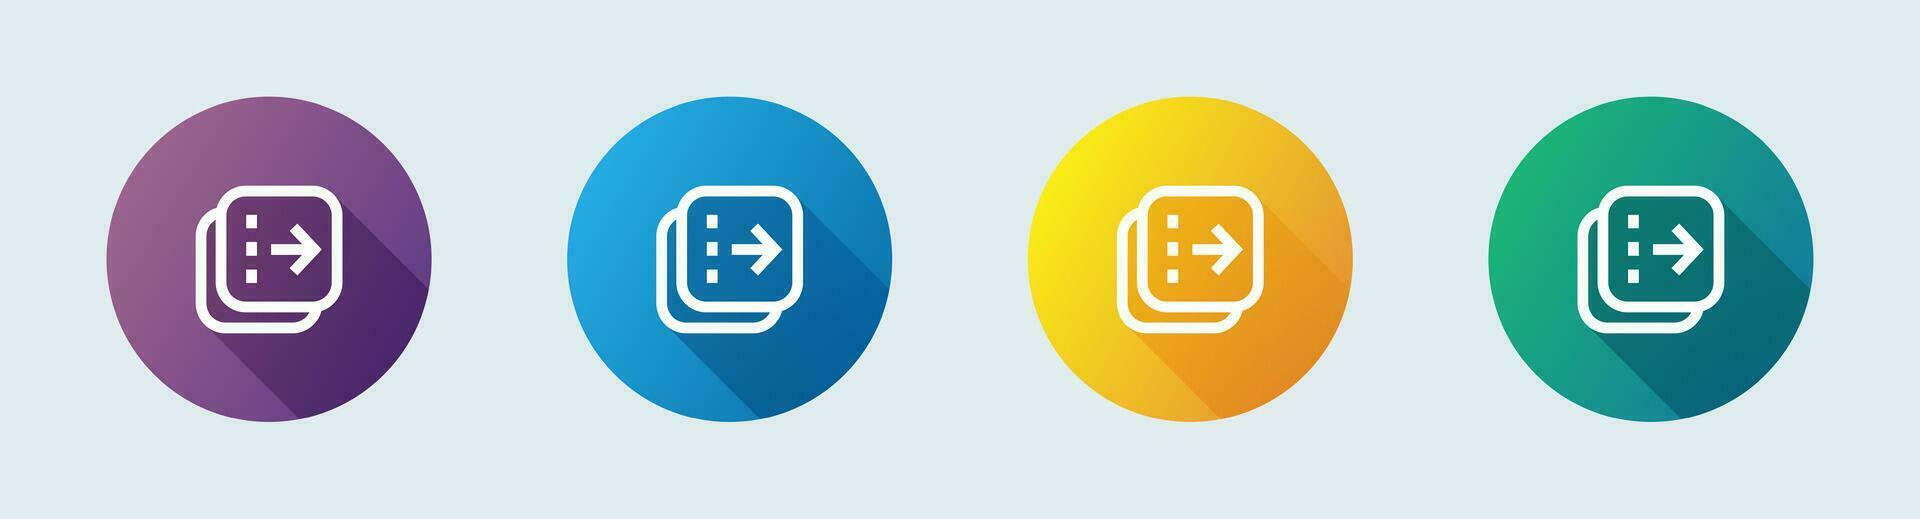 Flip line icon in flat design style. Arrow switch signs vector illustration.